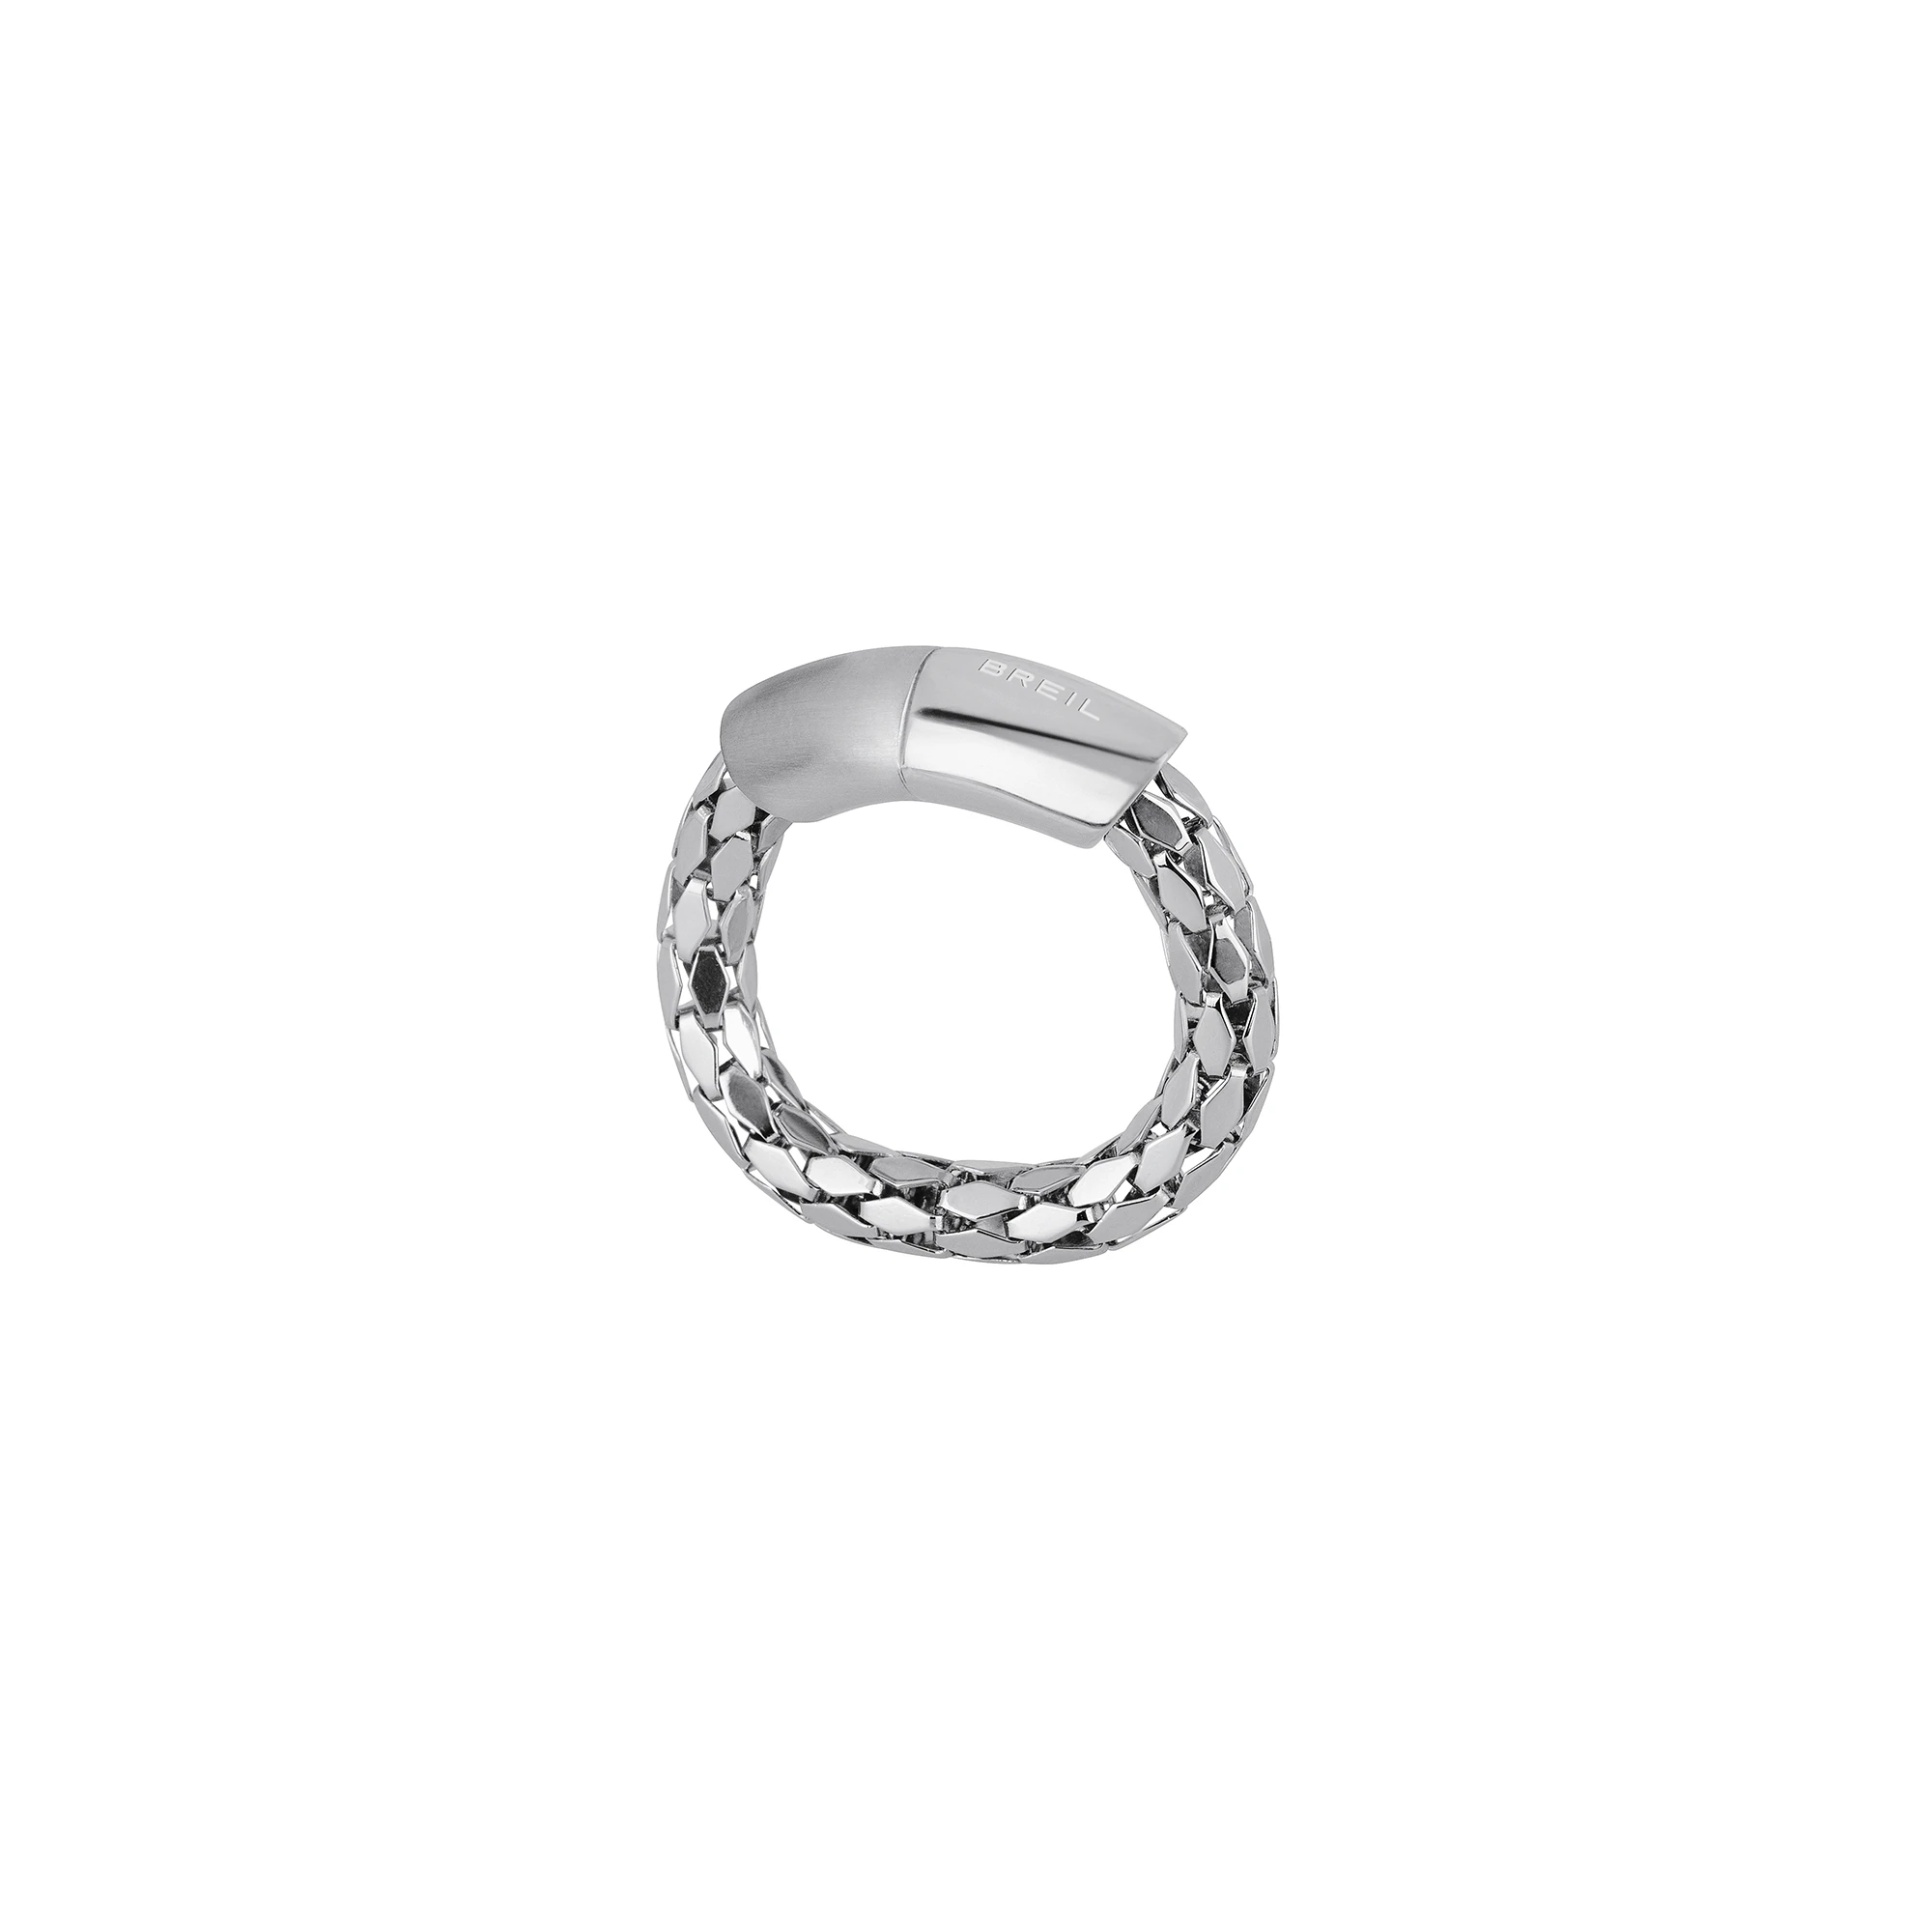 LIGHT - SHINY STAINLESS STEEL RING WITH BILUX ELEMENTS - 1 - TJ2144_ | Breil